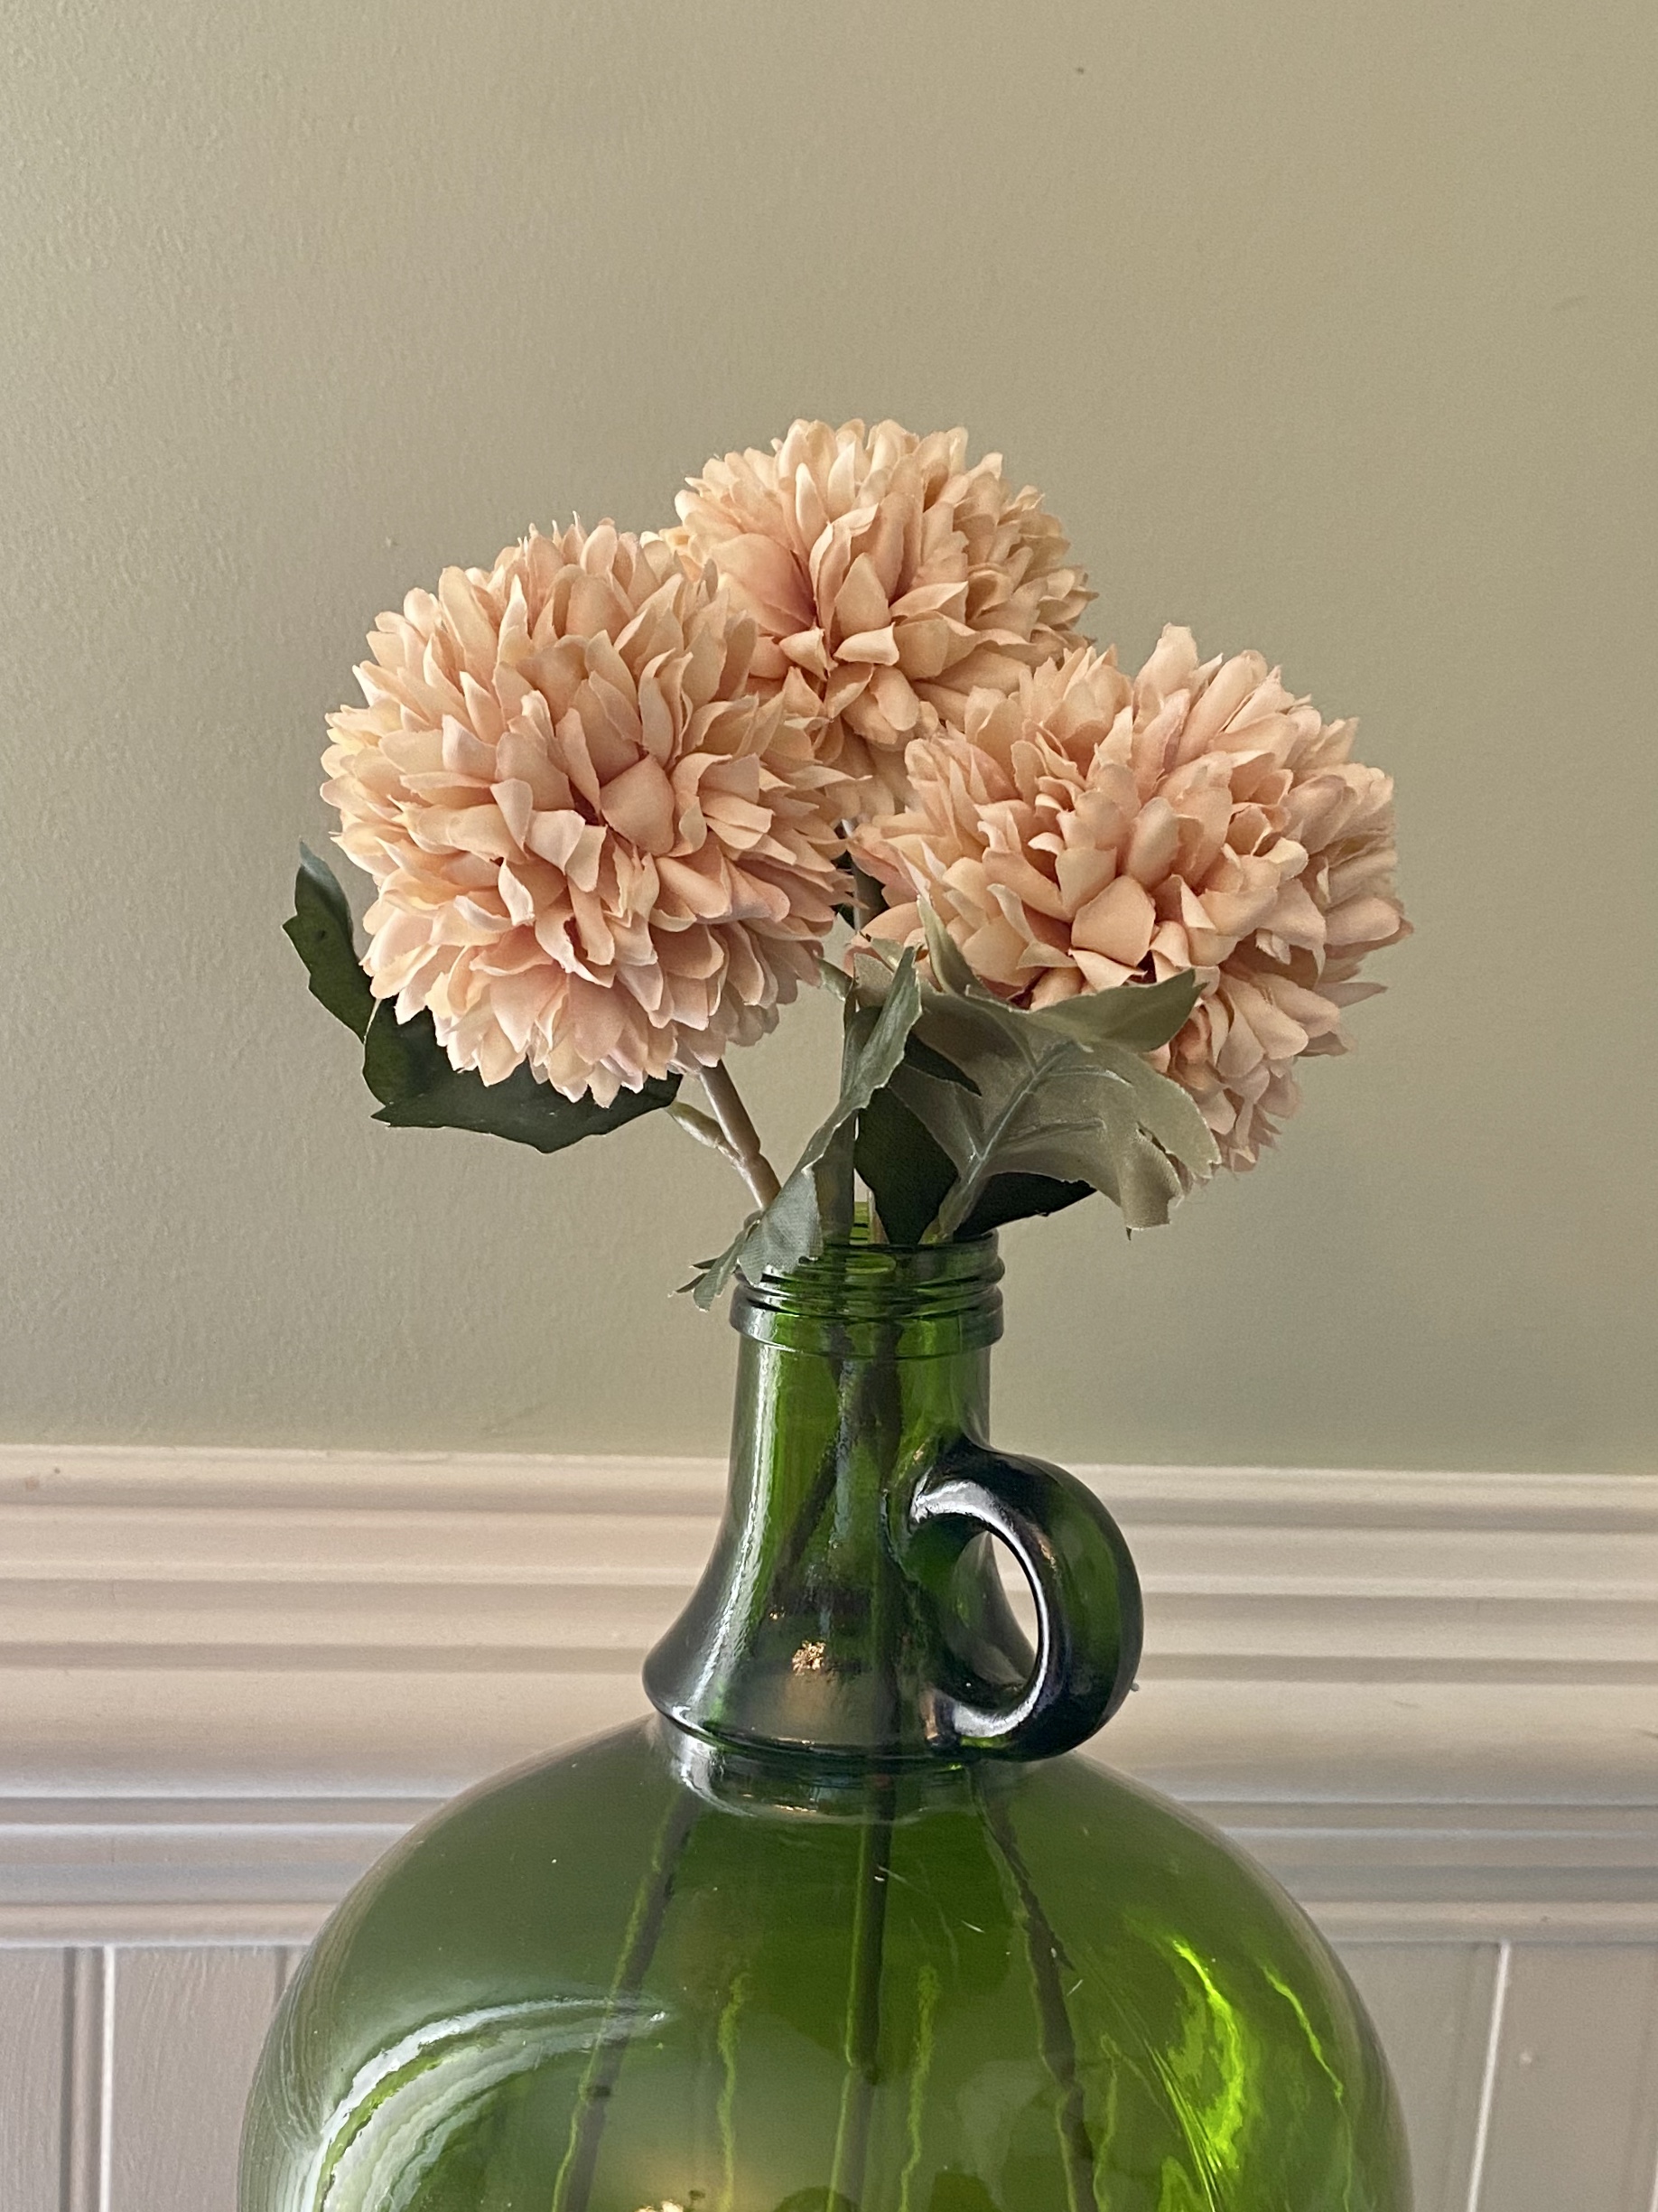 This long and slender Pink Pompom stem is made of fabric with a durable plastic stem and is perfect for any season.  This stem will compliment any decor in your home and it measures 14 inches long